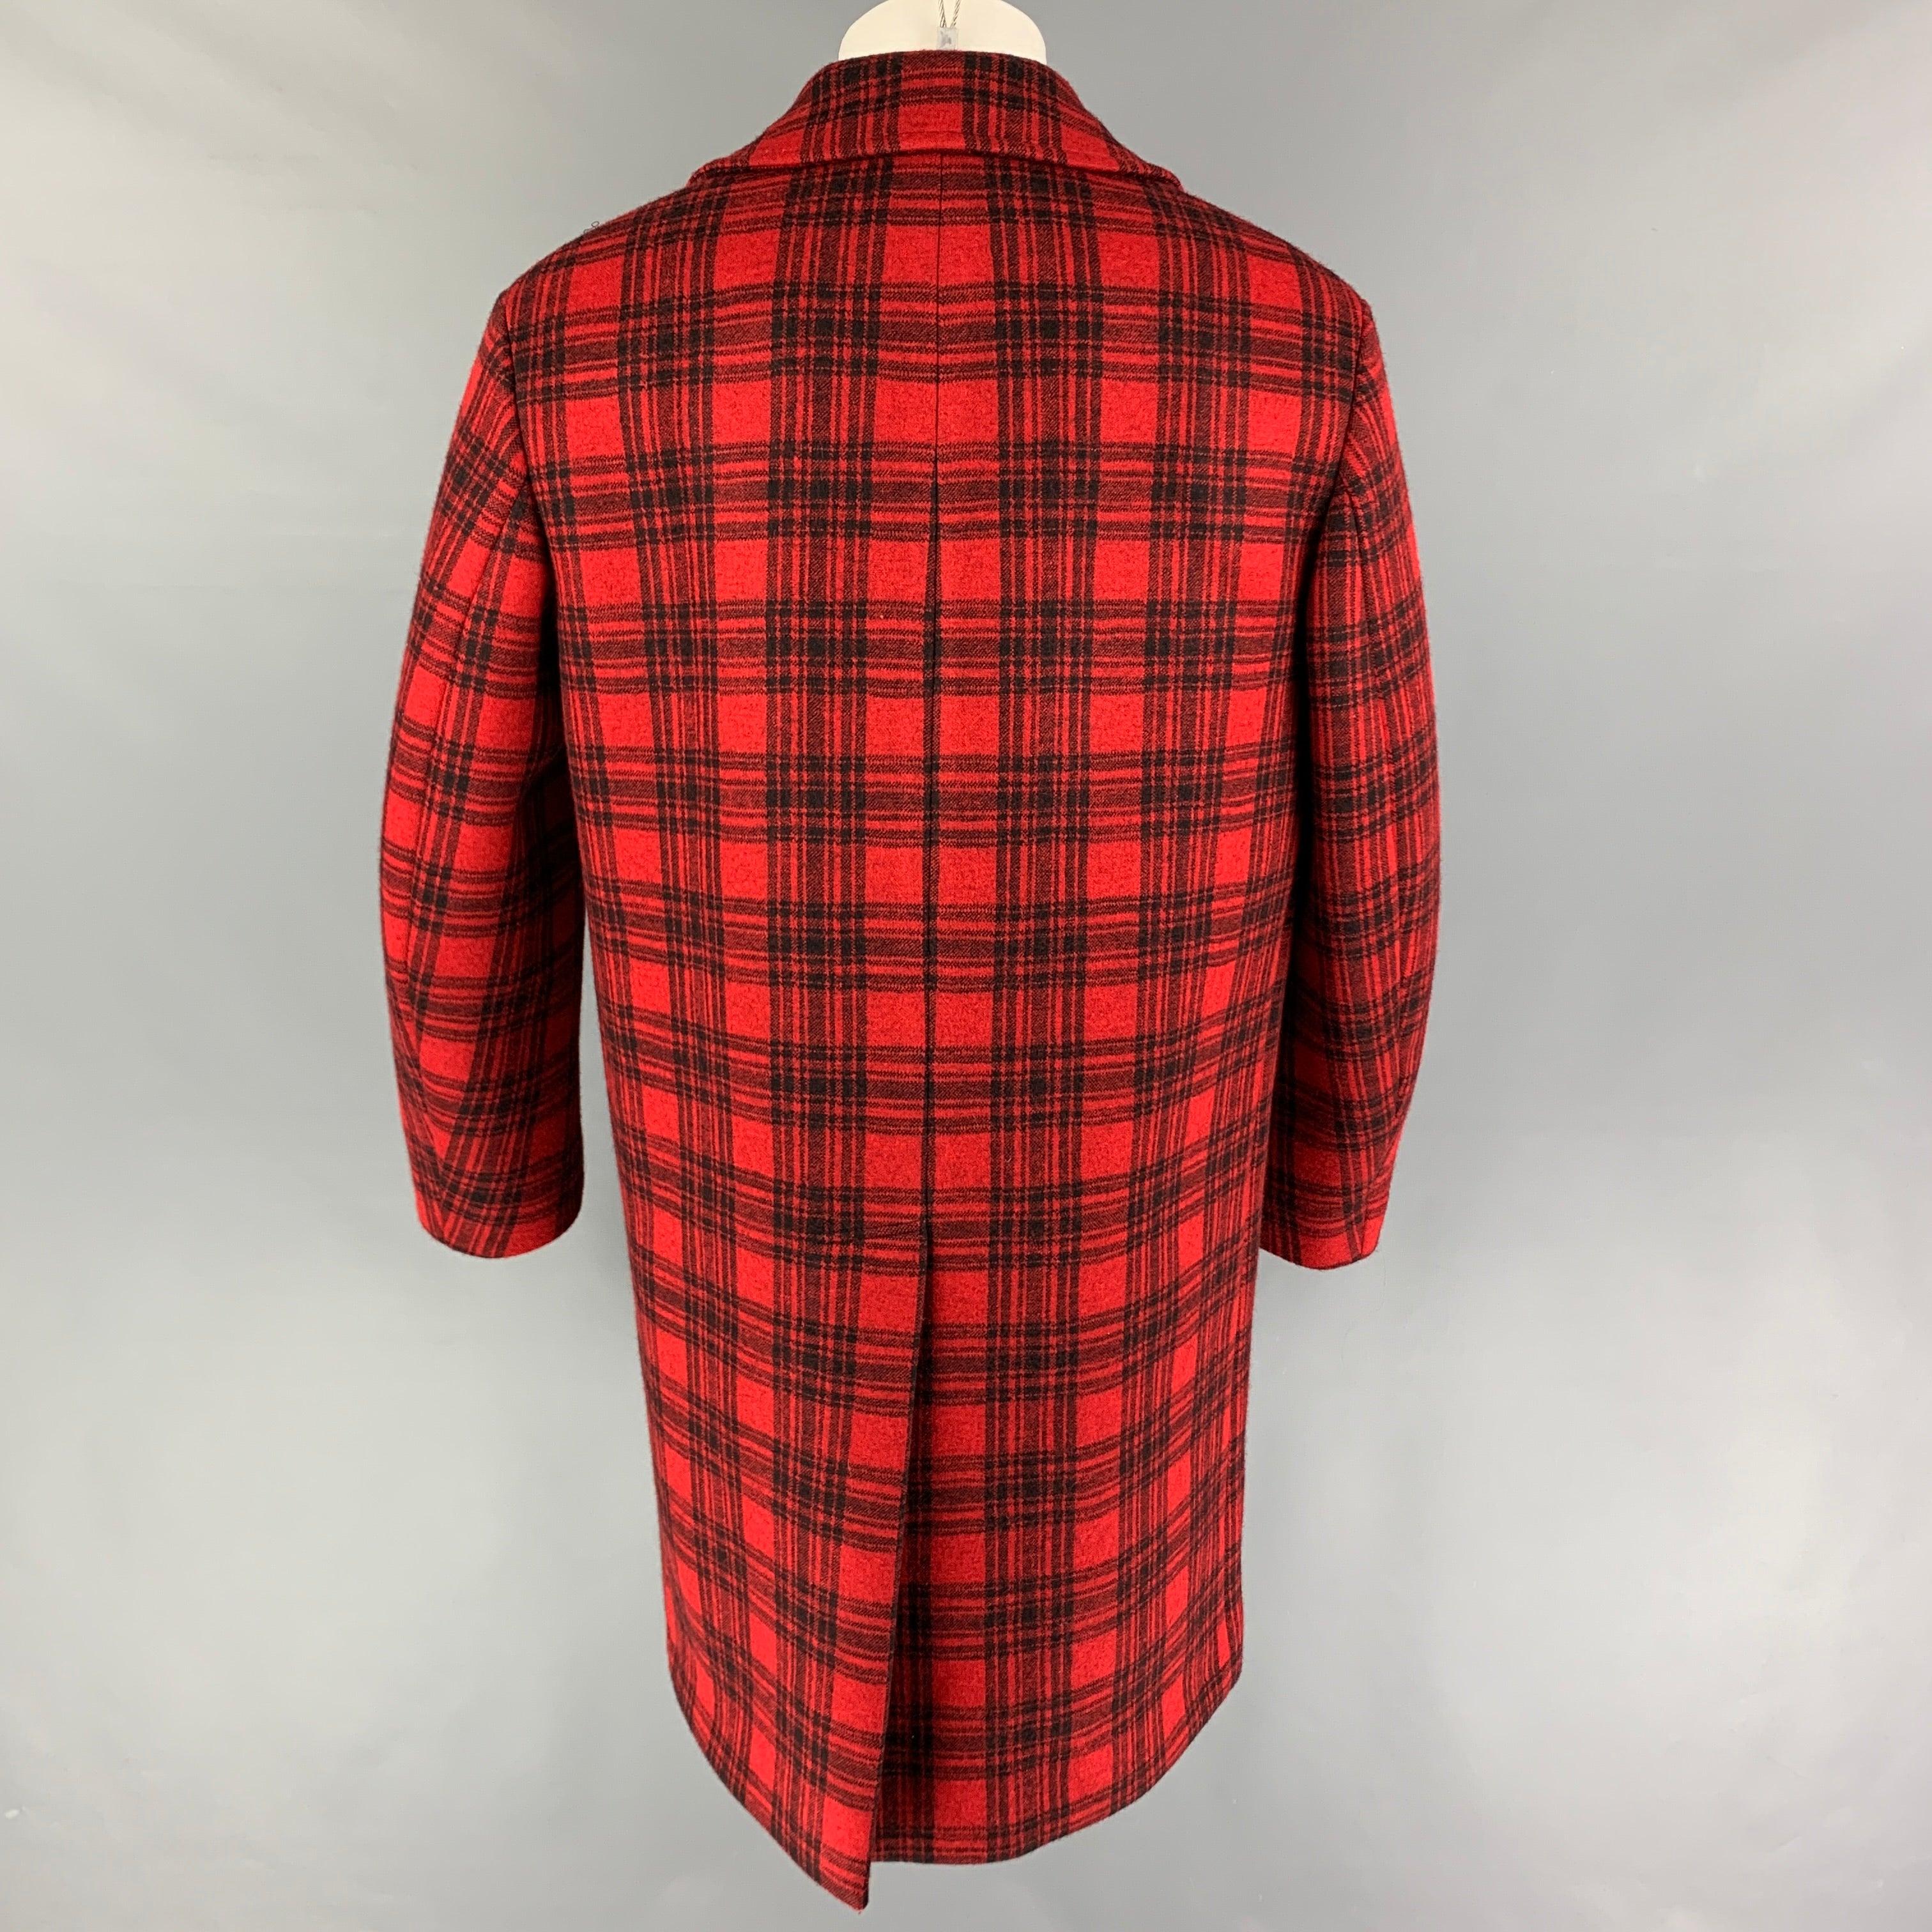 GUCCI FW 16 Size 40 Red Black Plaid Wool Blend Notch Lapel Coat In Excellent Condition For Sale In San Francisco, CA